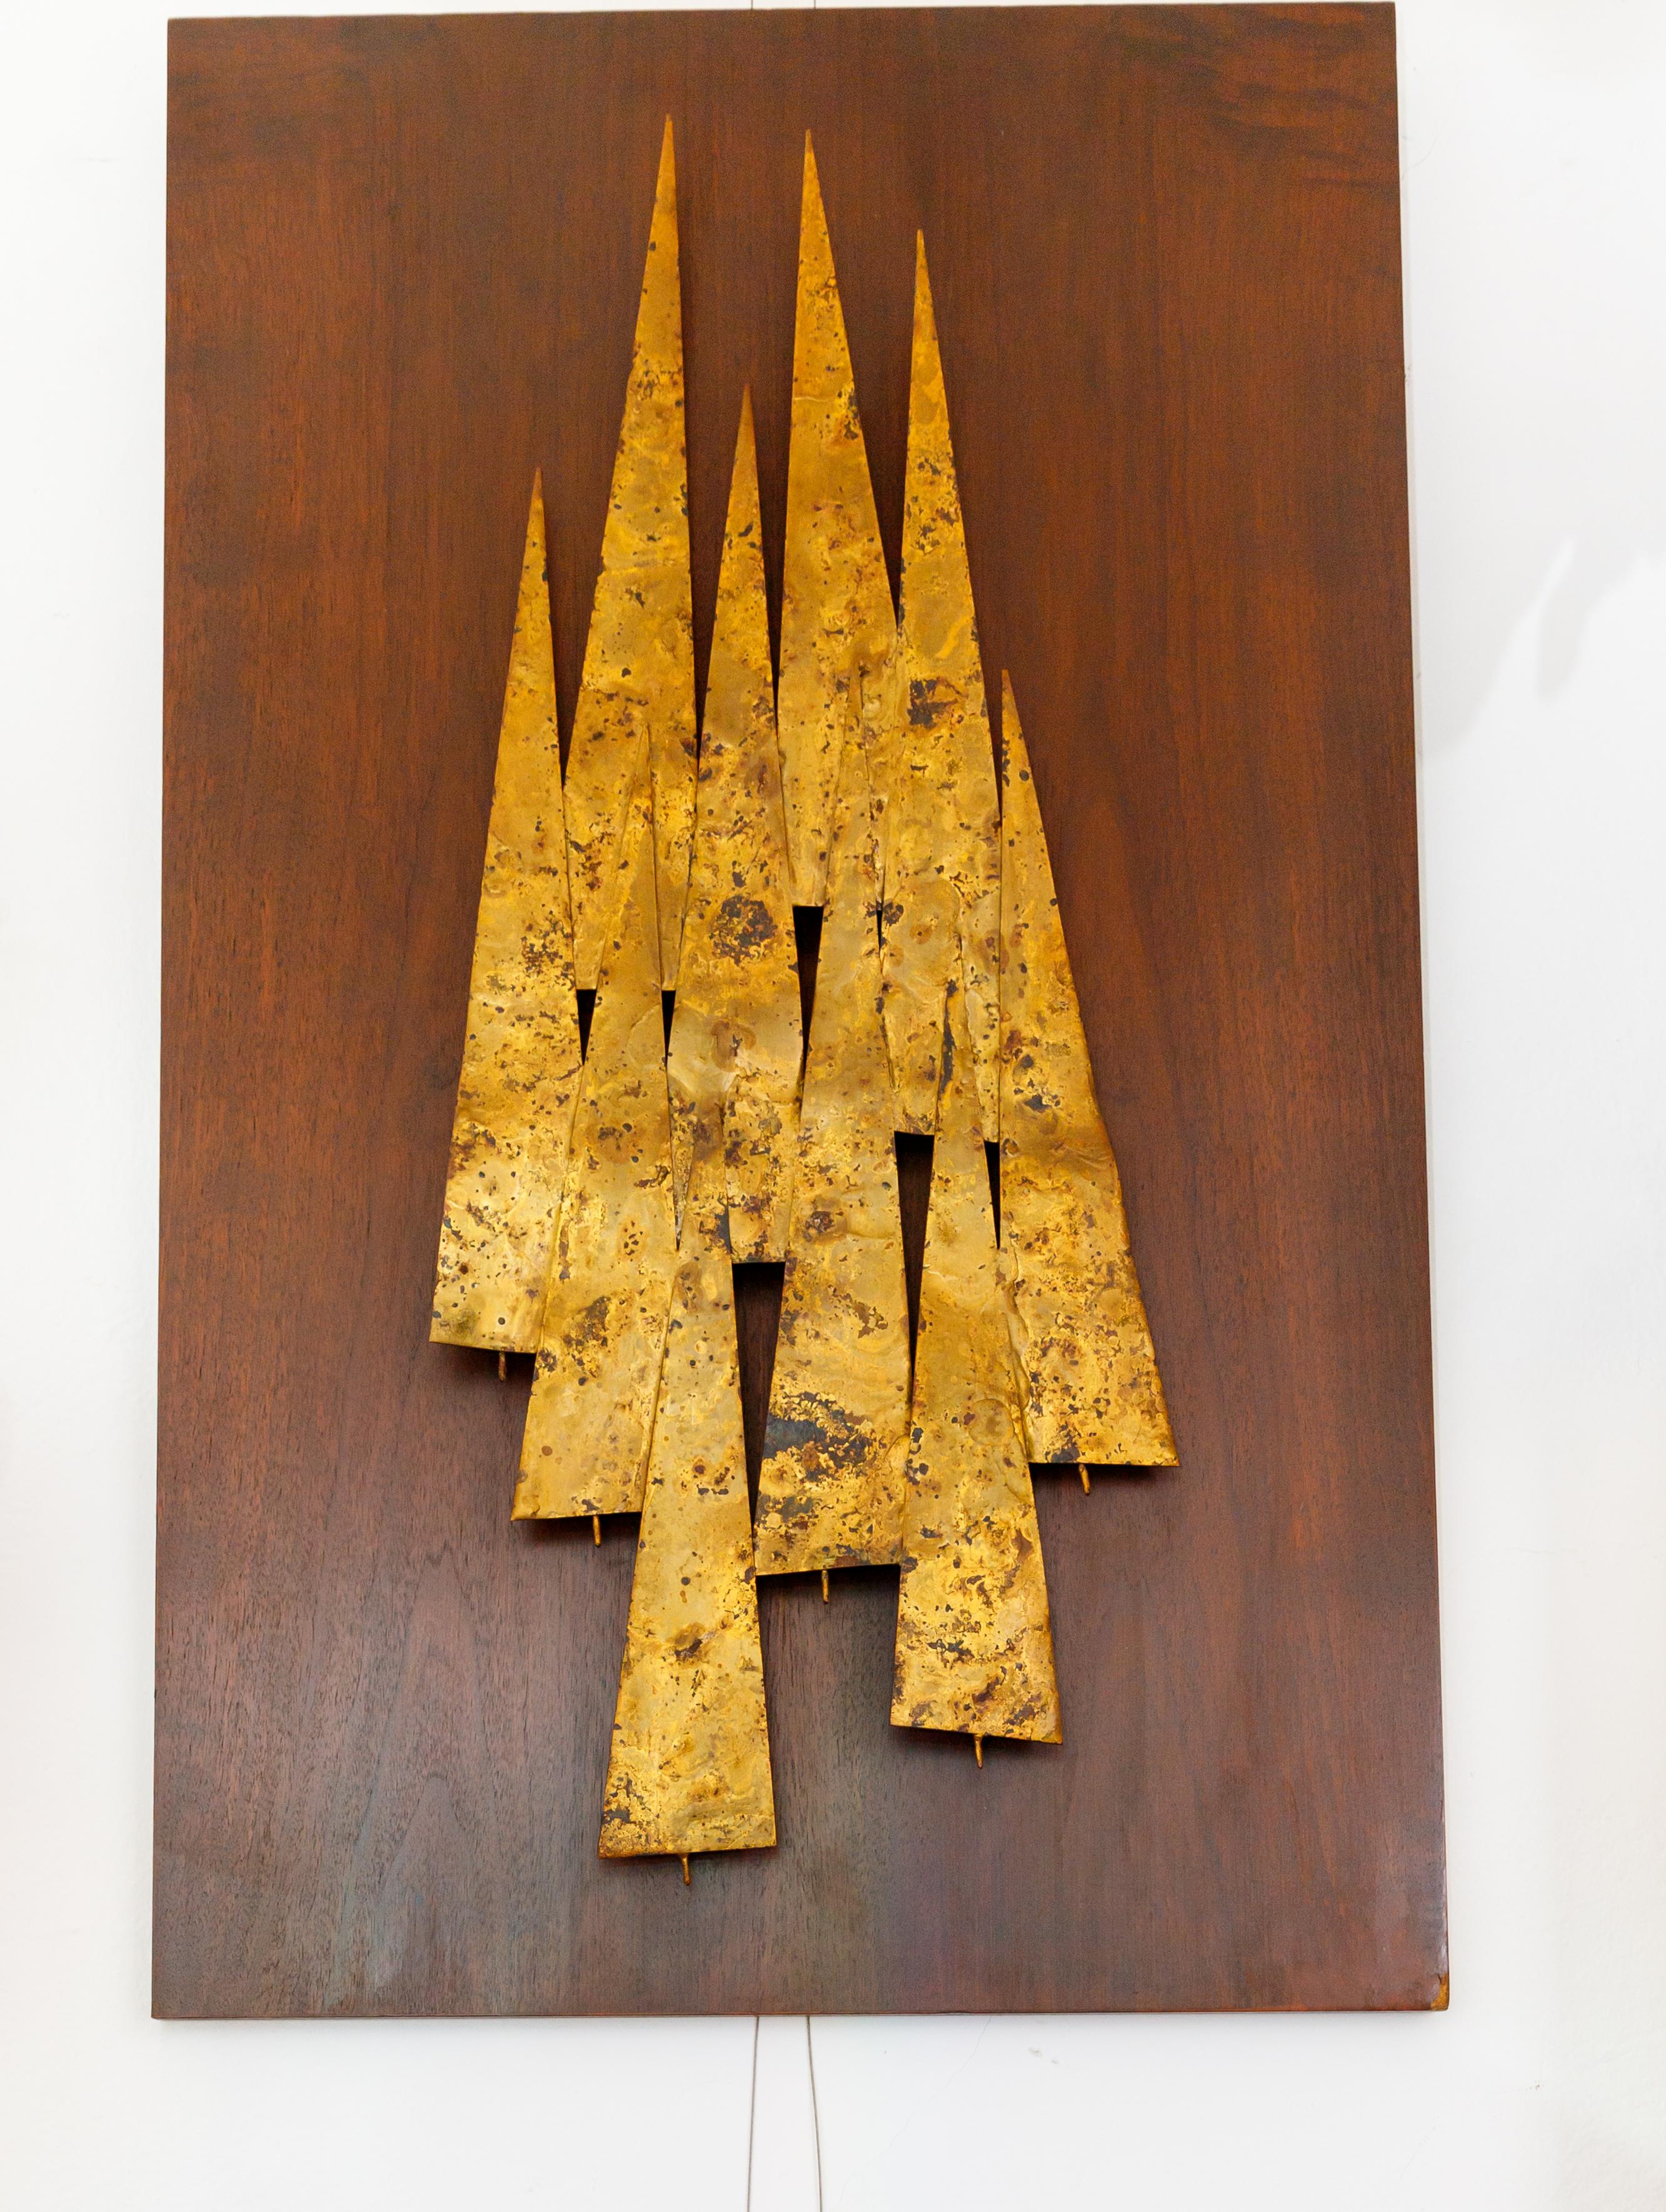 American Metal Tree Form Sculpture Mounted on Walnut Plank For Sale